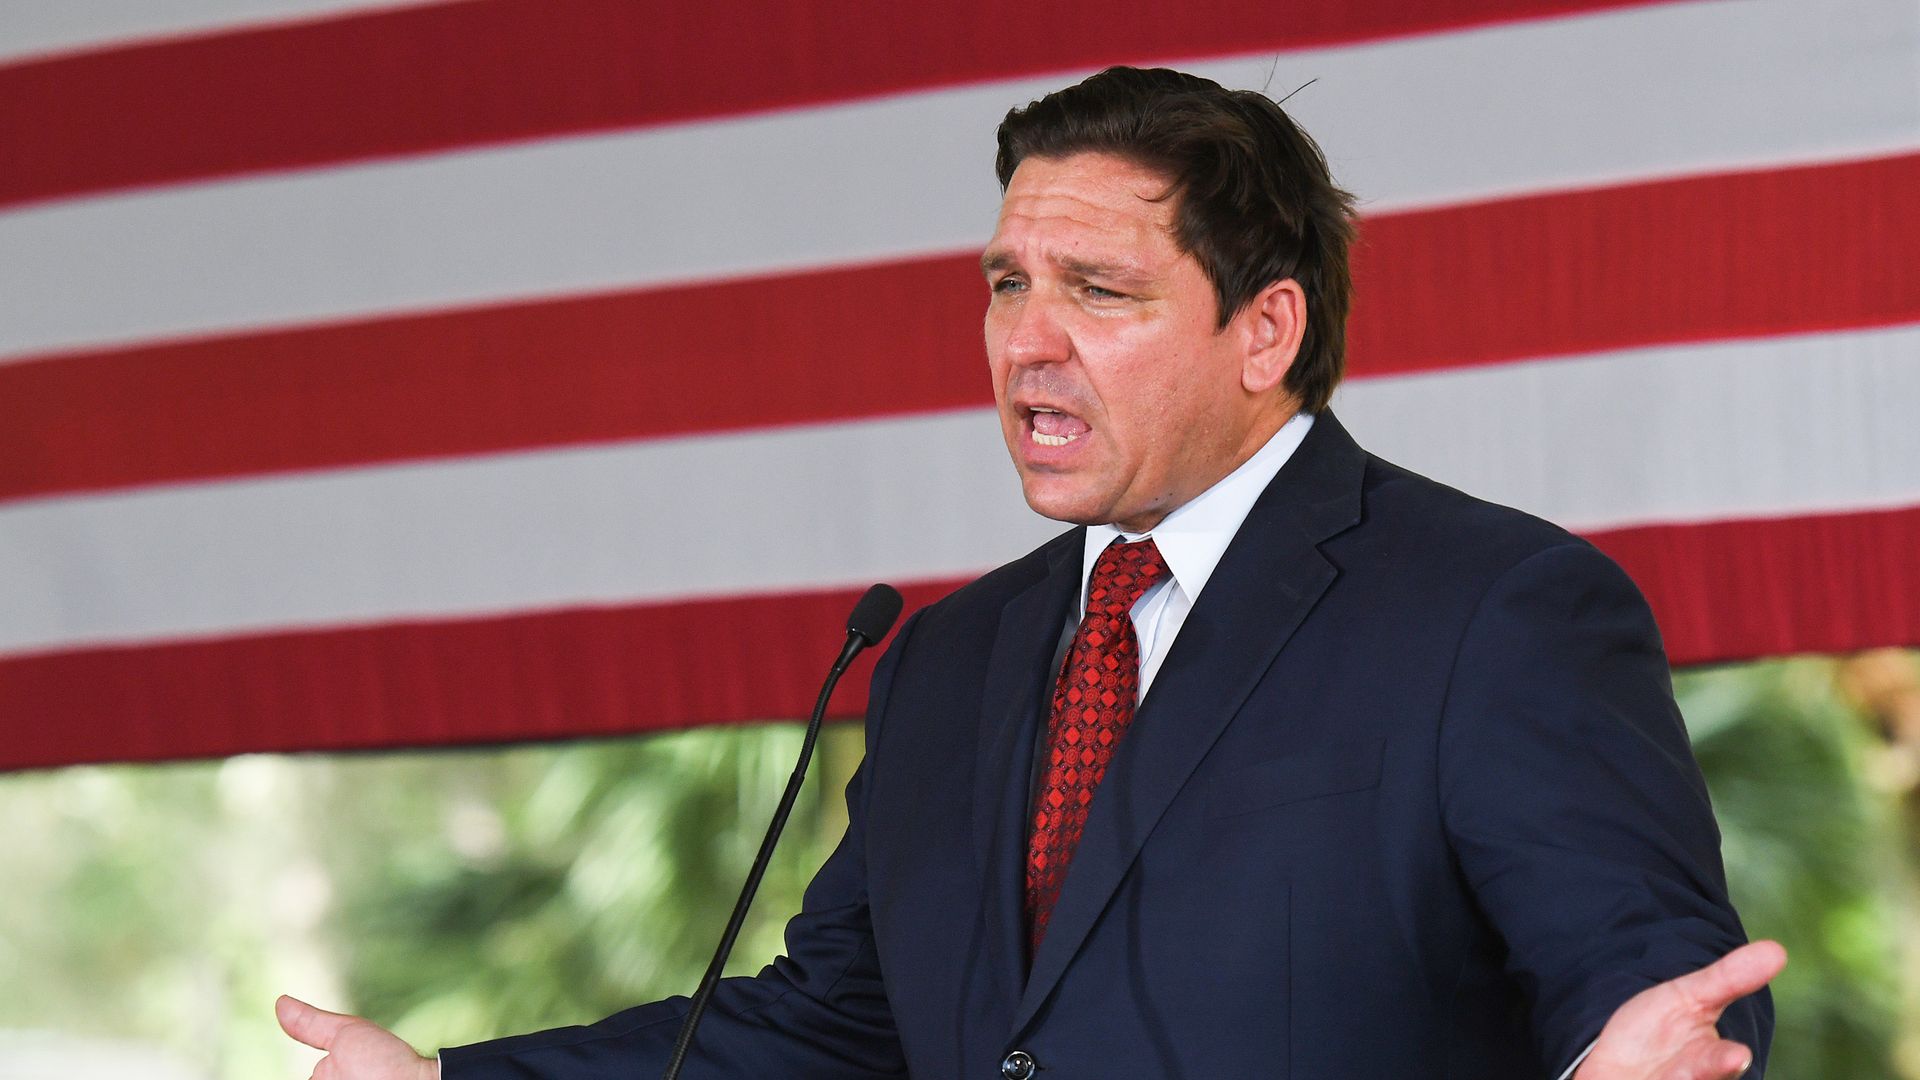 Photo of Ron DeSantis speaking with his hands spread